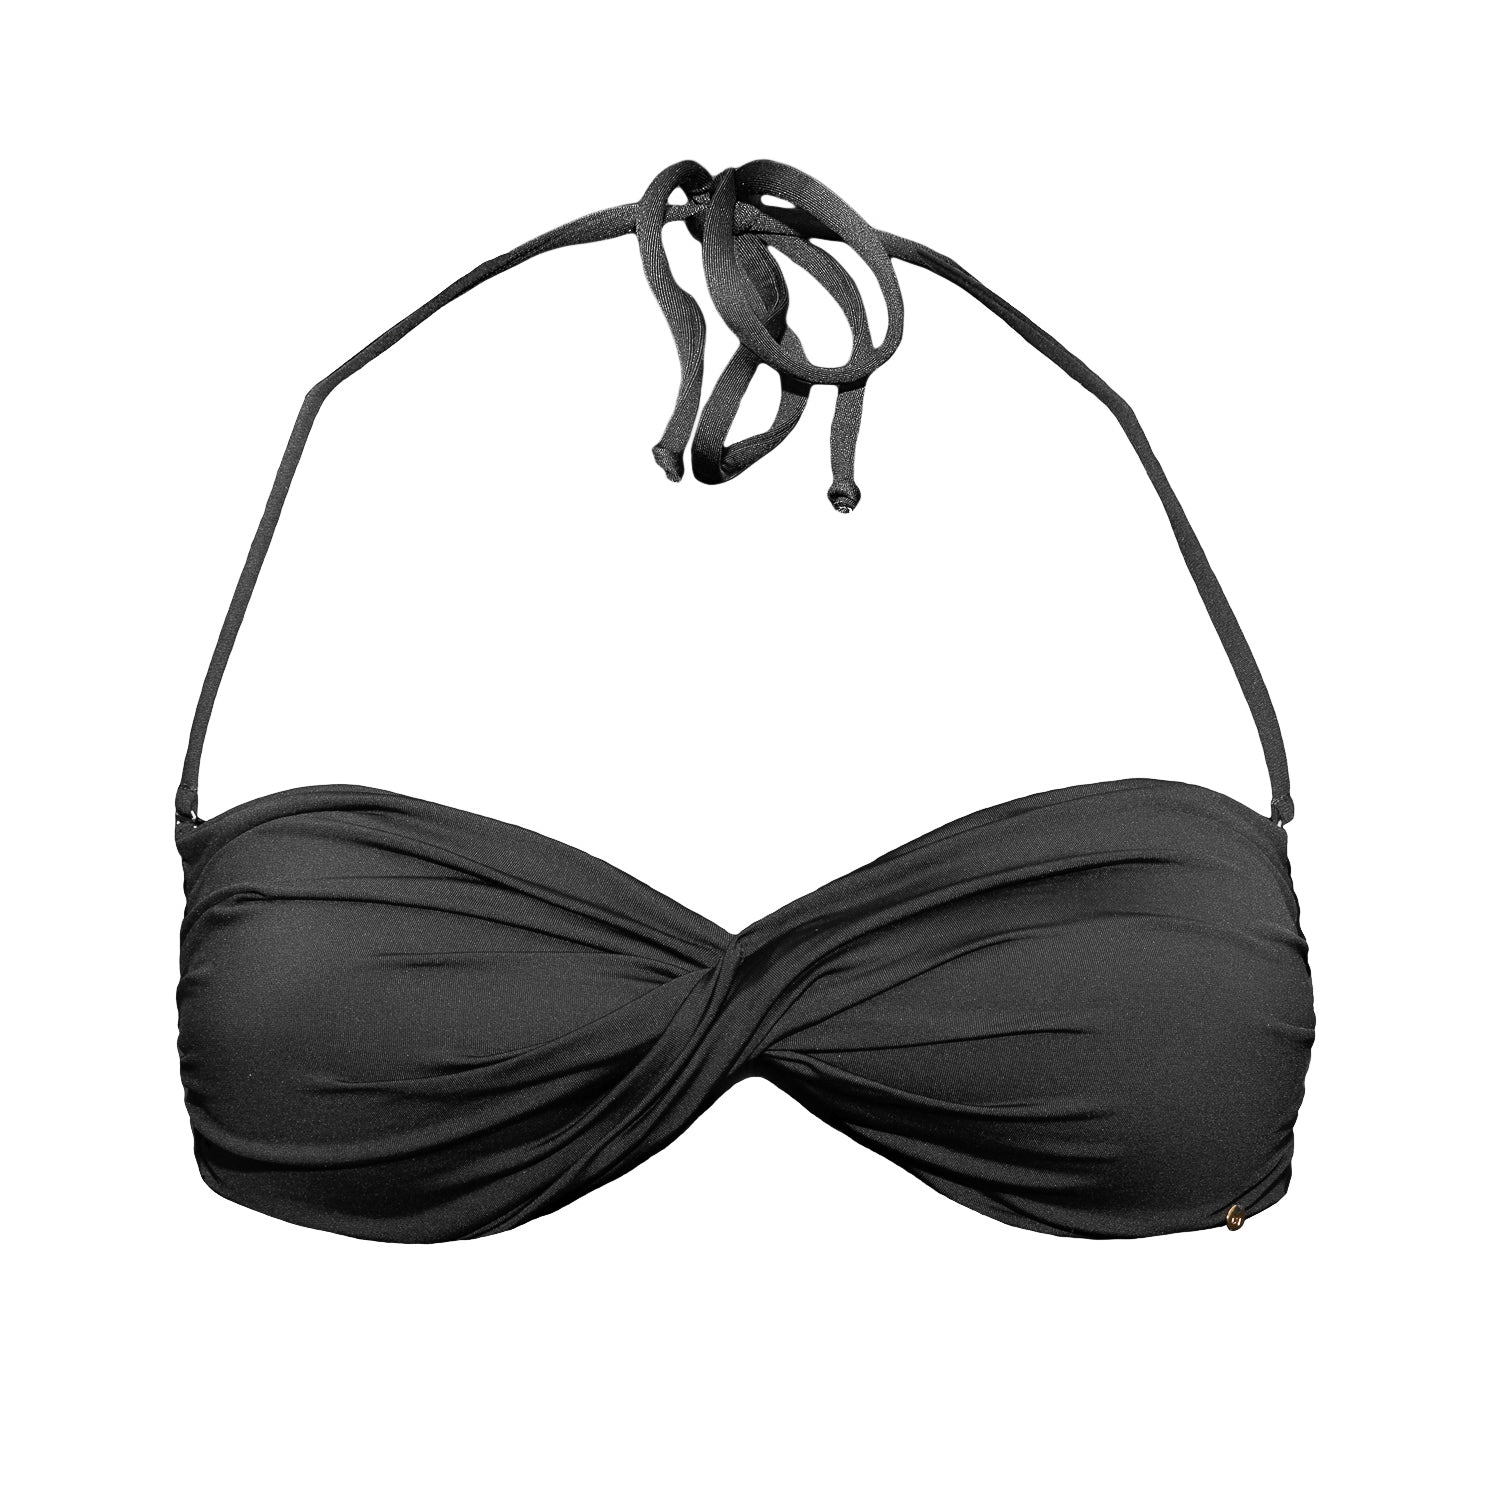 Bandeau bikini top with an extra soft touch, fine lining and thick feel. Made sustainably and ethically in Europe from finest polyamide. Perfected fit for every body shape.